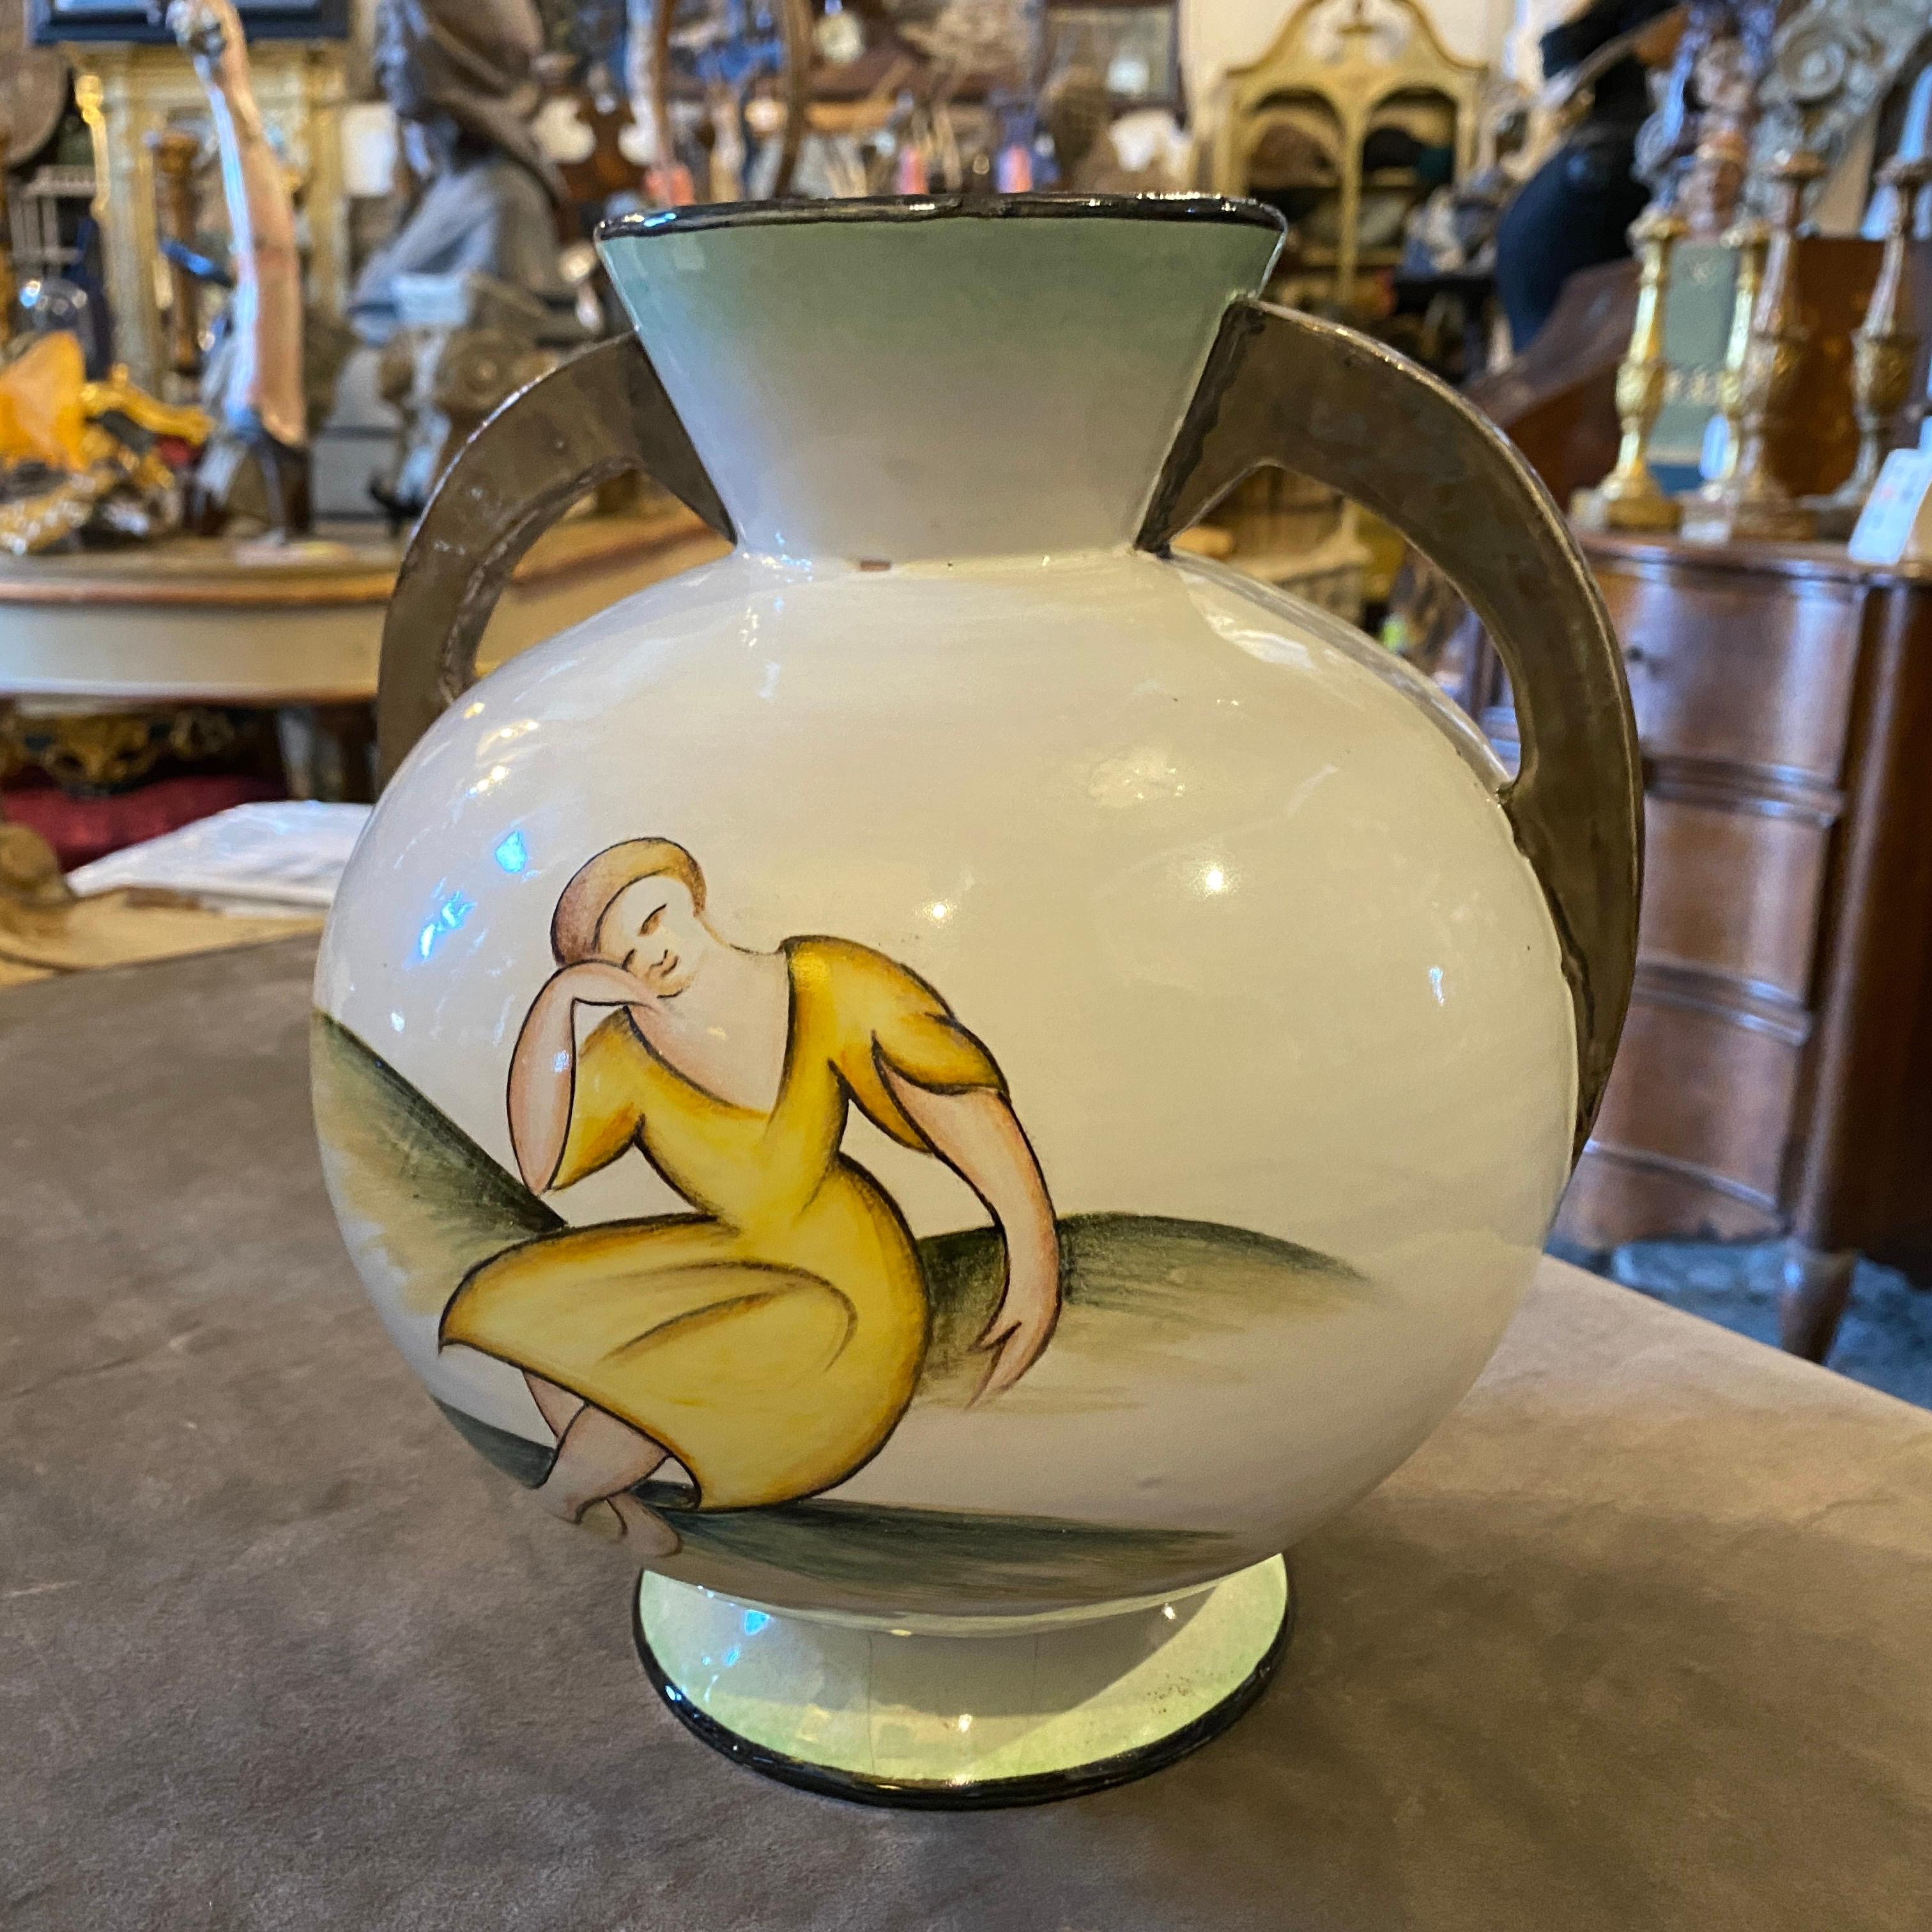 A stylish art deco hand-crafted and decorated ceramic Italian vase by Corrado Francia for Rinaldo Pardi ceramics. Some signs of the age showed in the pics. It's marked on the bottom.